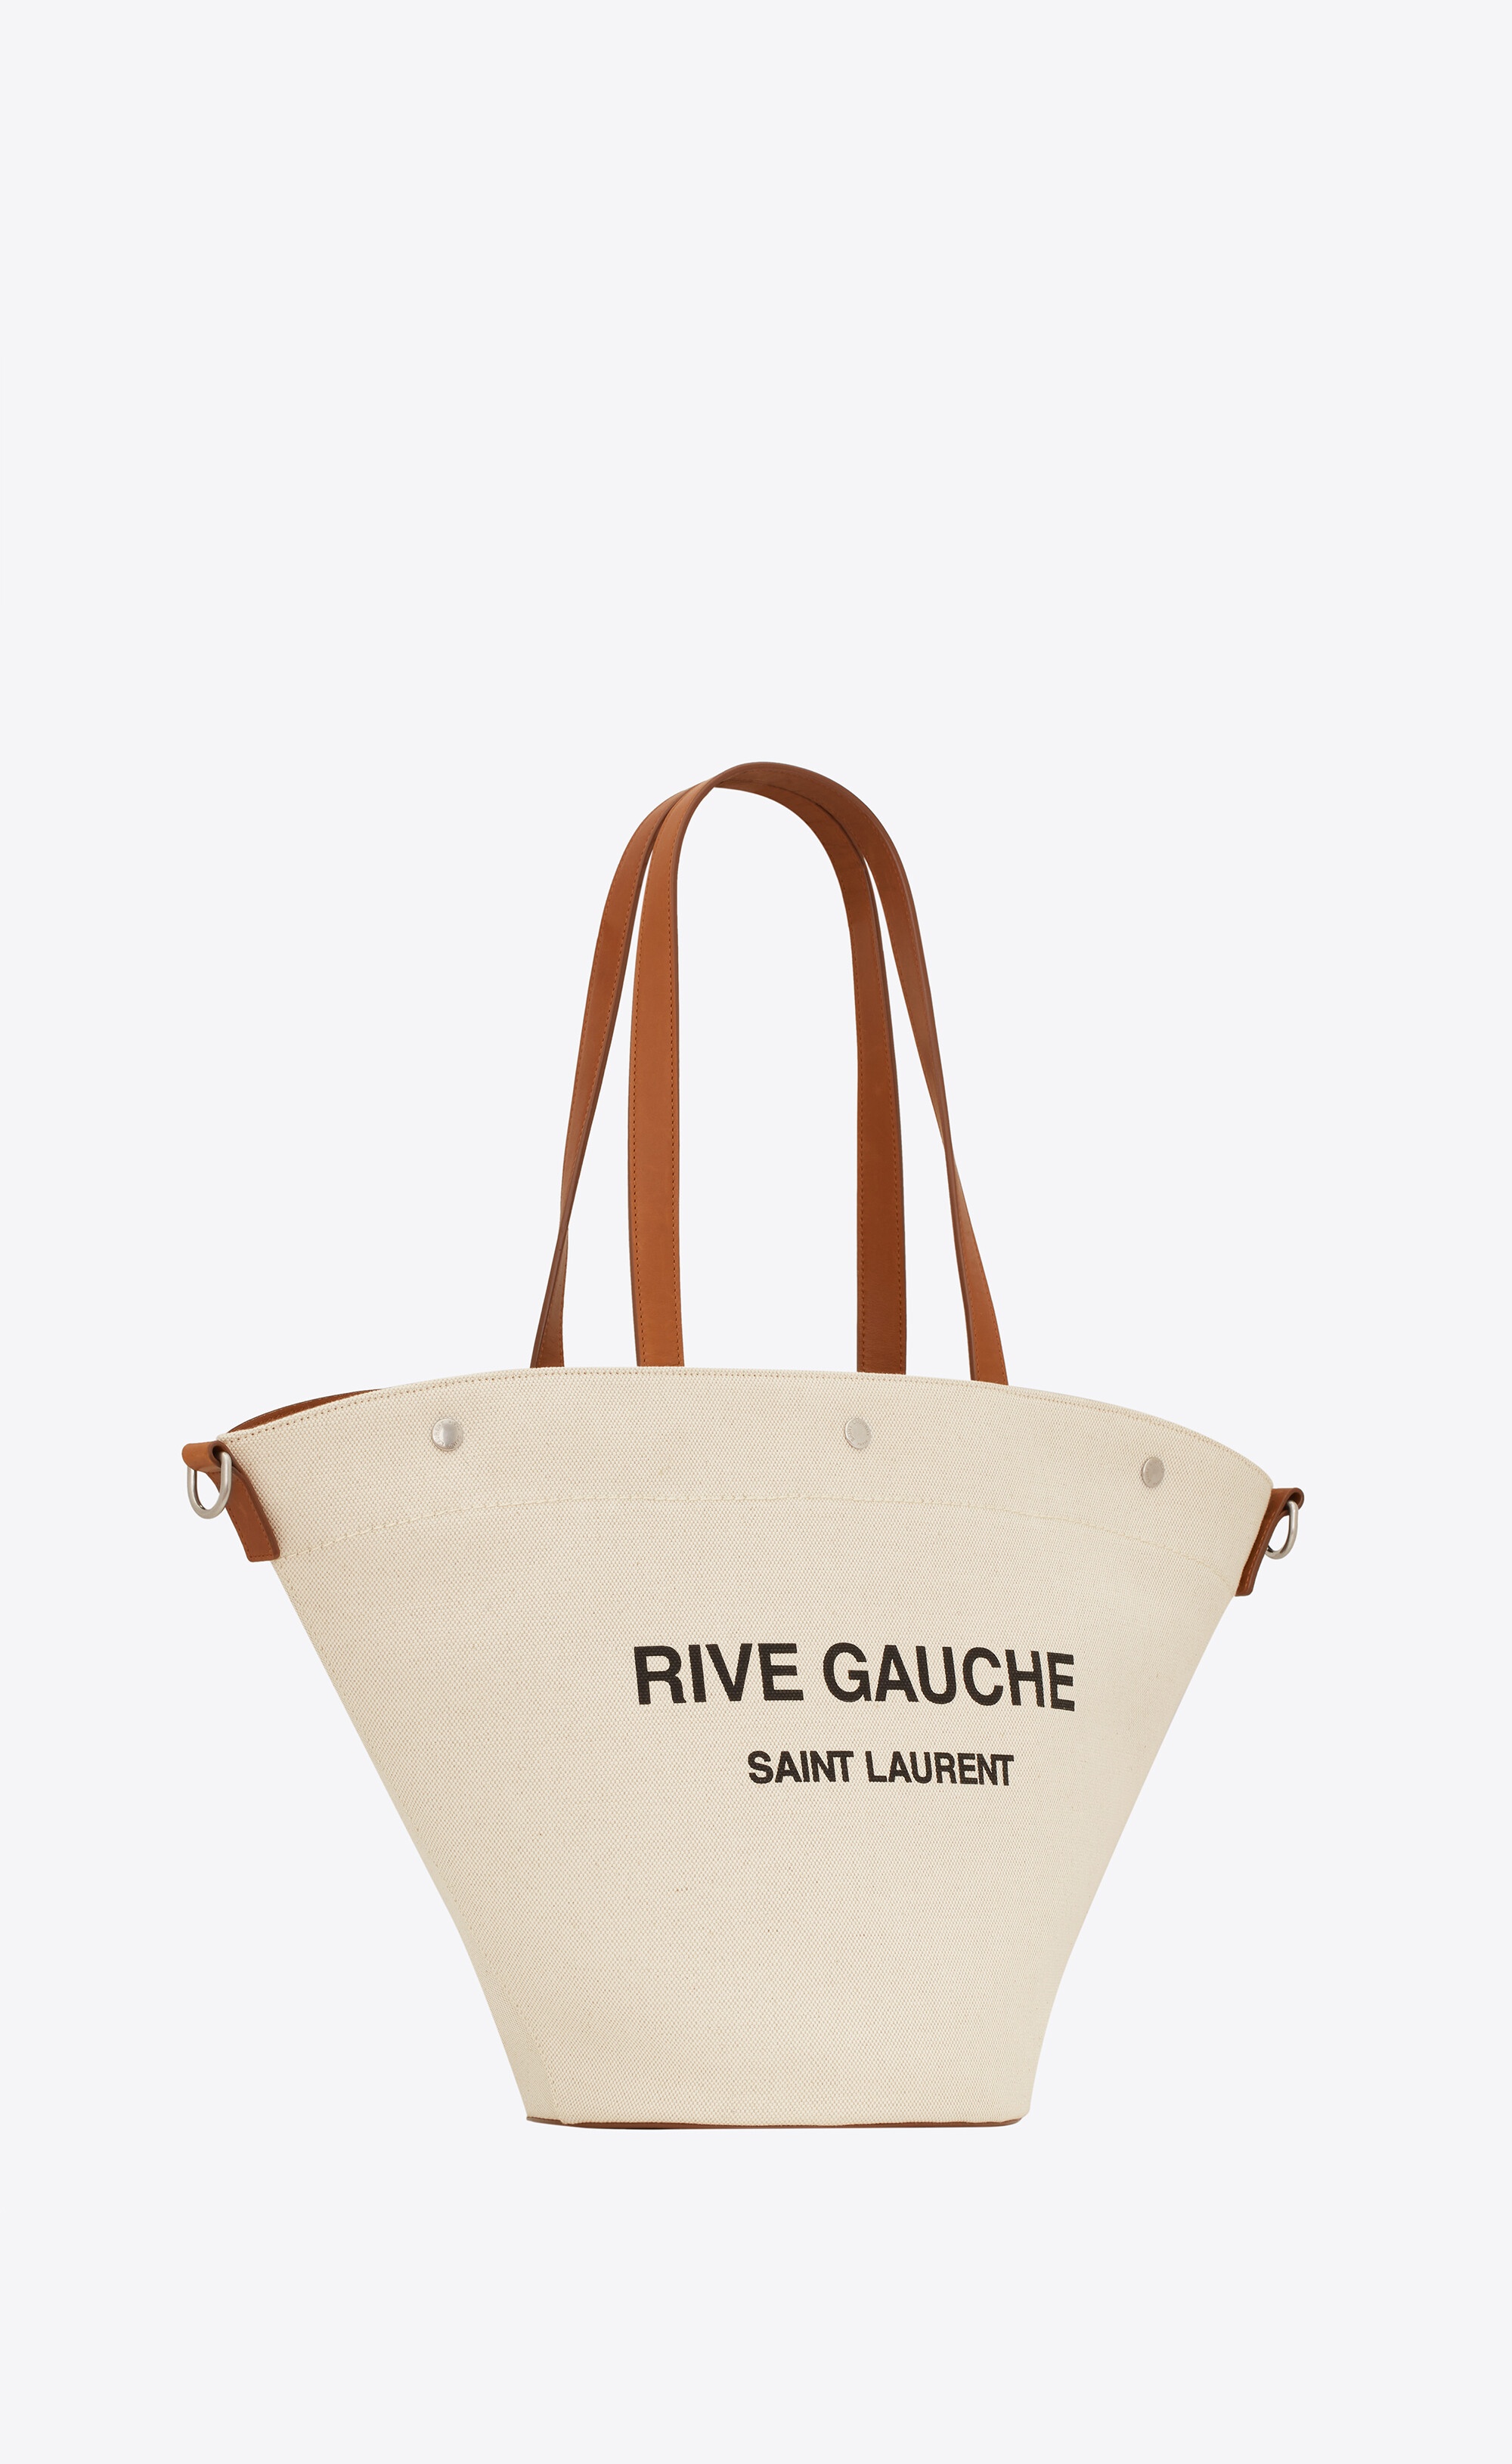 rive gauche tote bag in canvas and vintage leather - 6